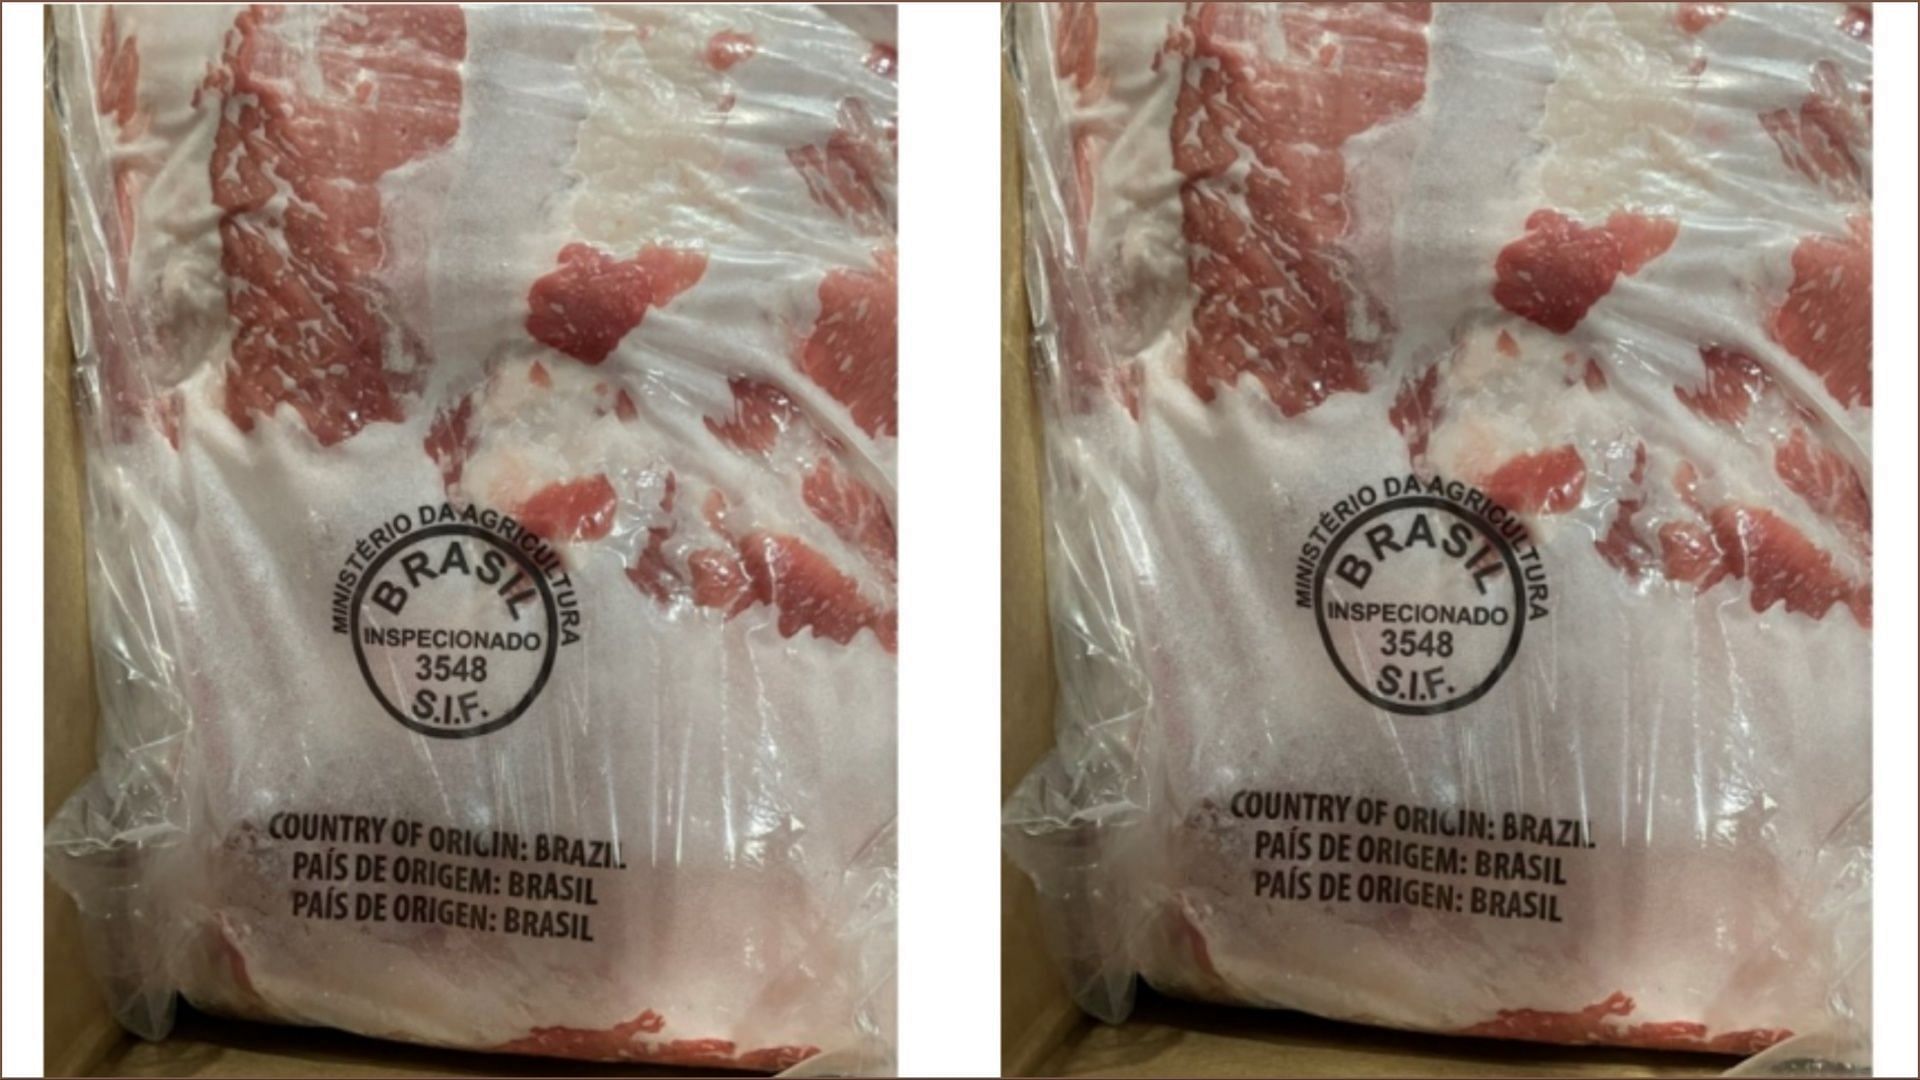 The recalled Bellboy frozen, raw pork products were being sold without a mandatory FSIS inspection (Image via FSIS)